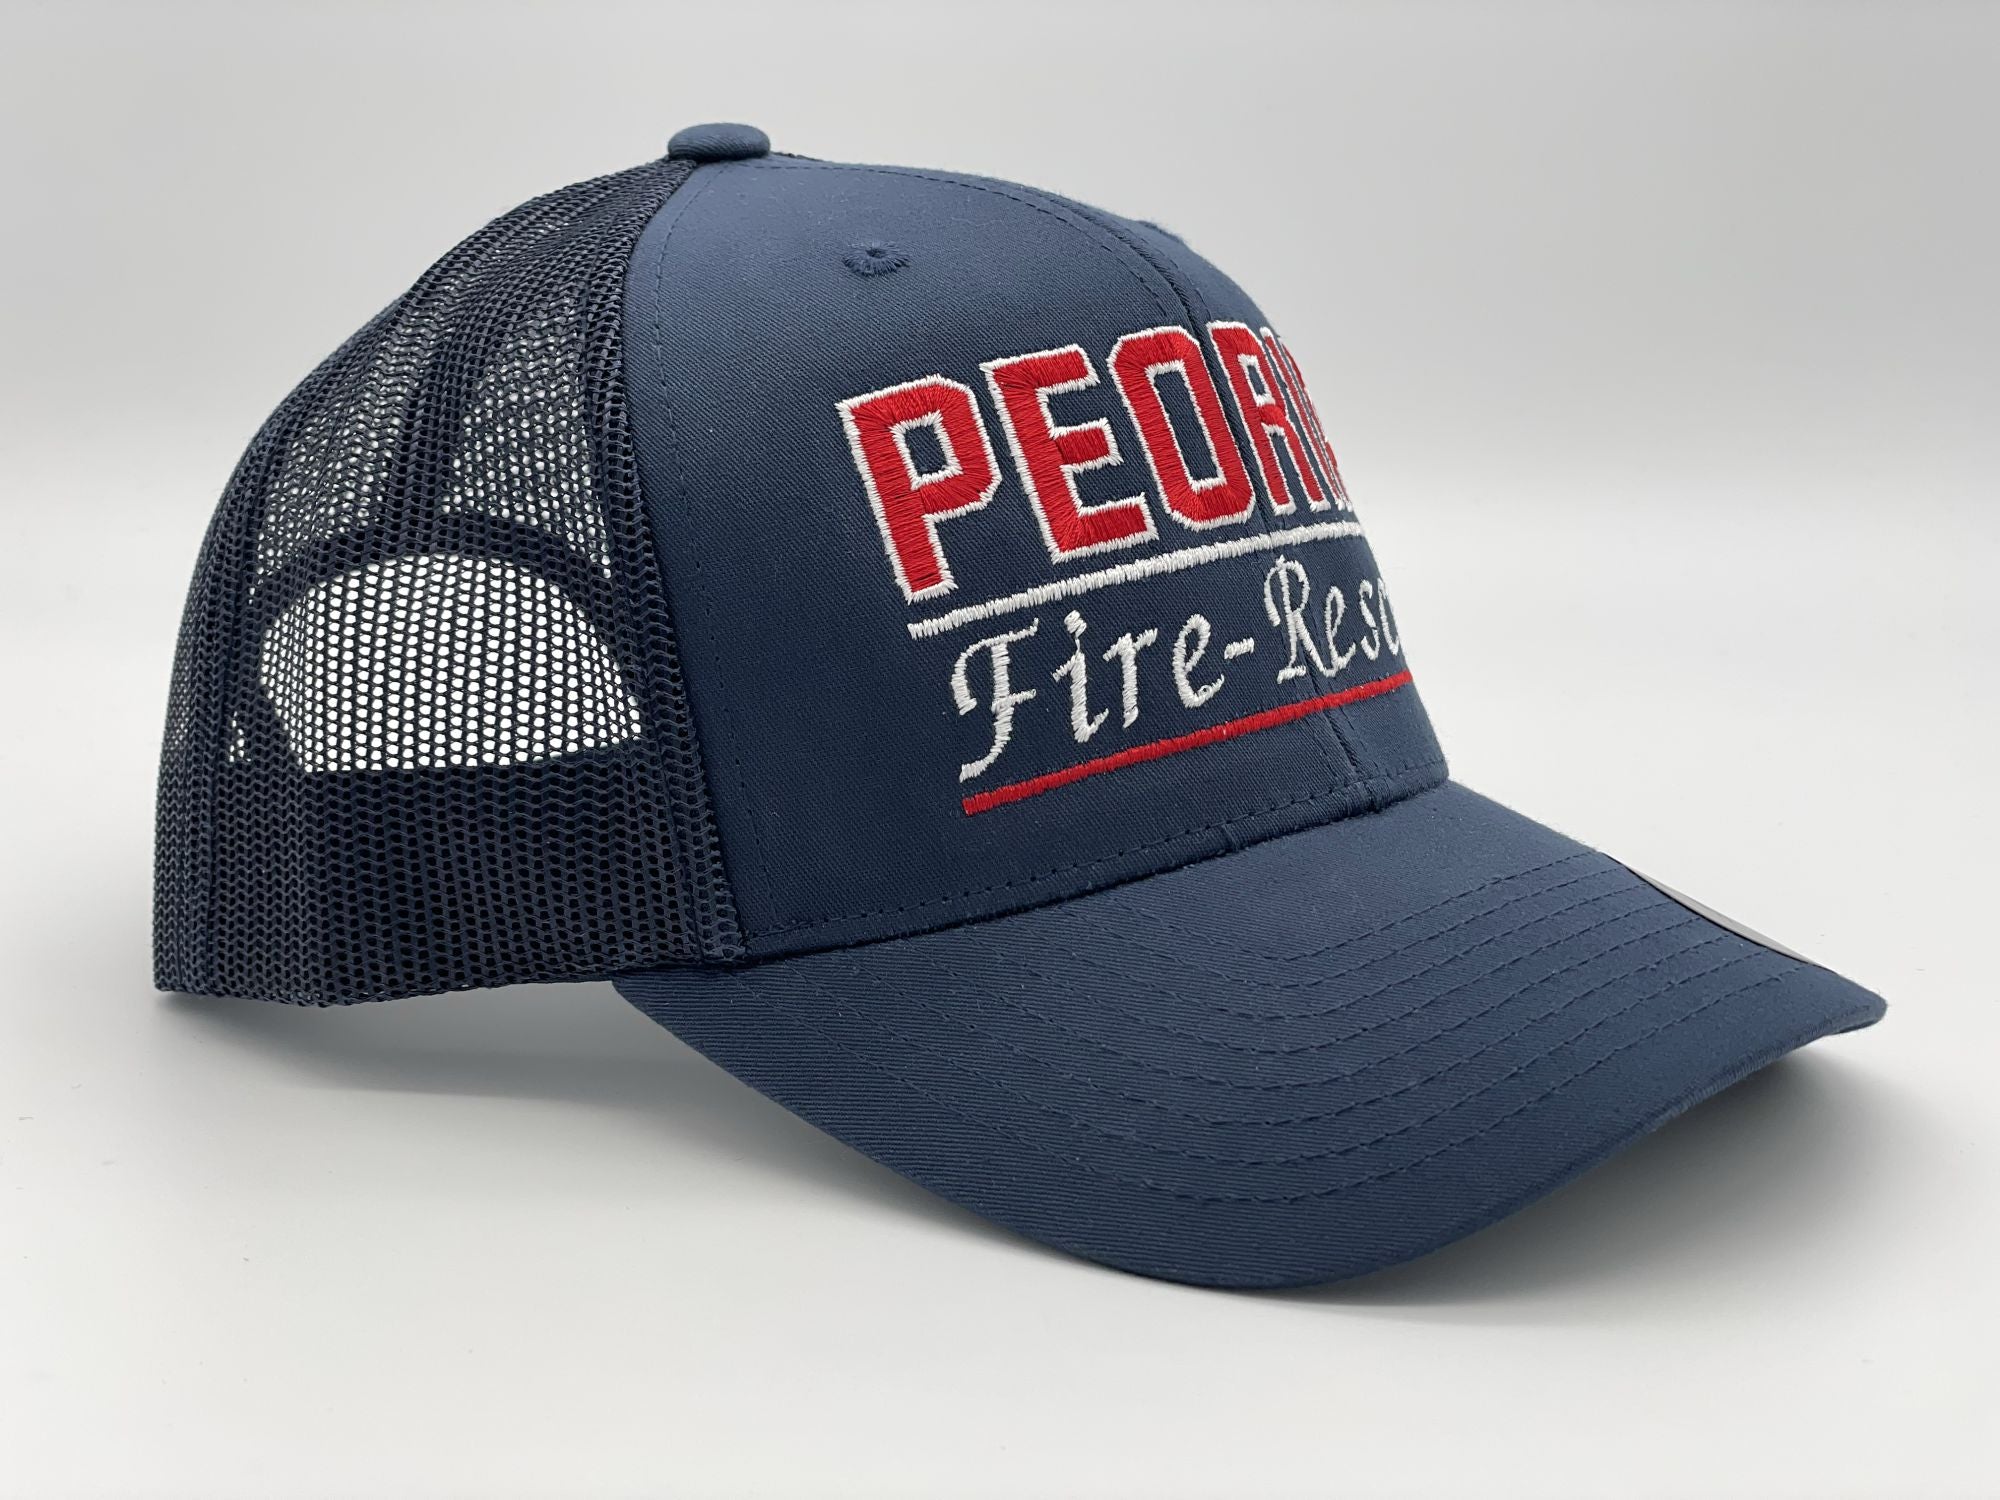 Peoria Fire Department Local 50 - Style 4 (Snapback Mesh Back)